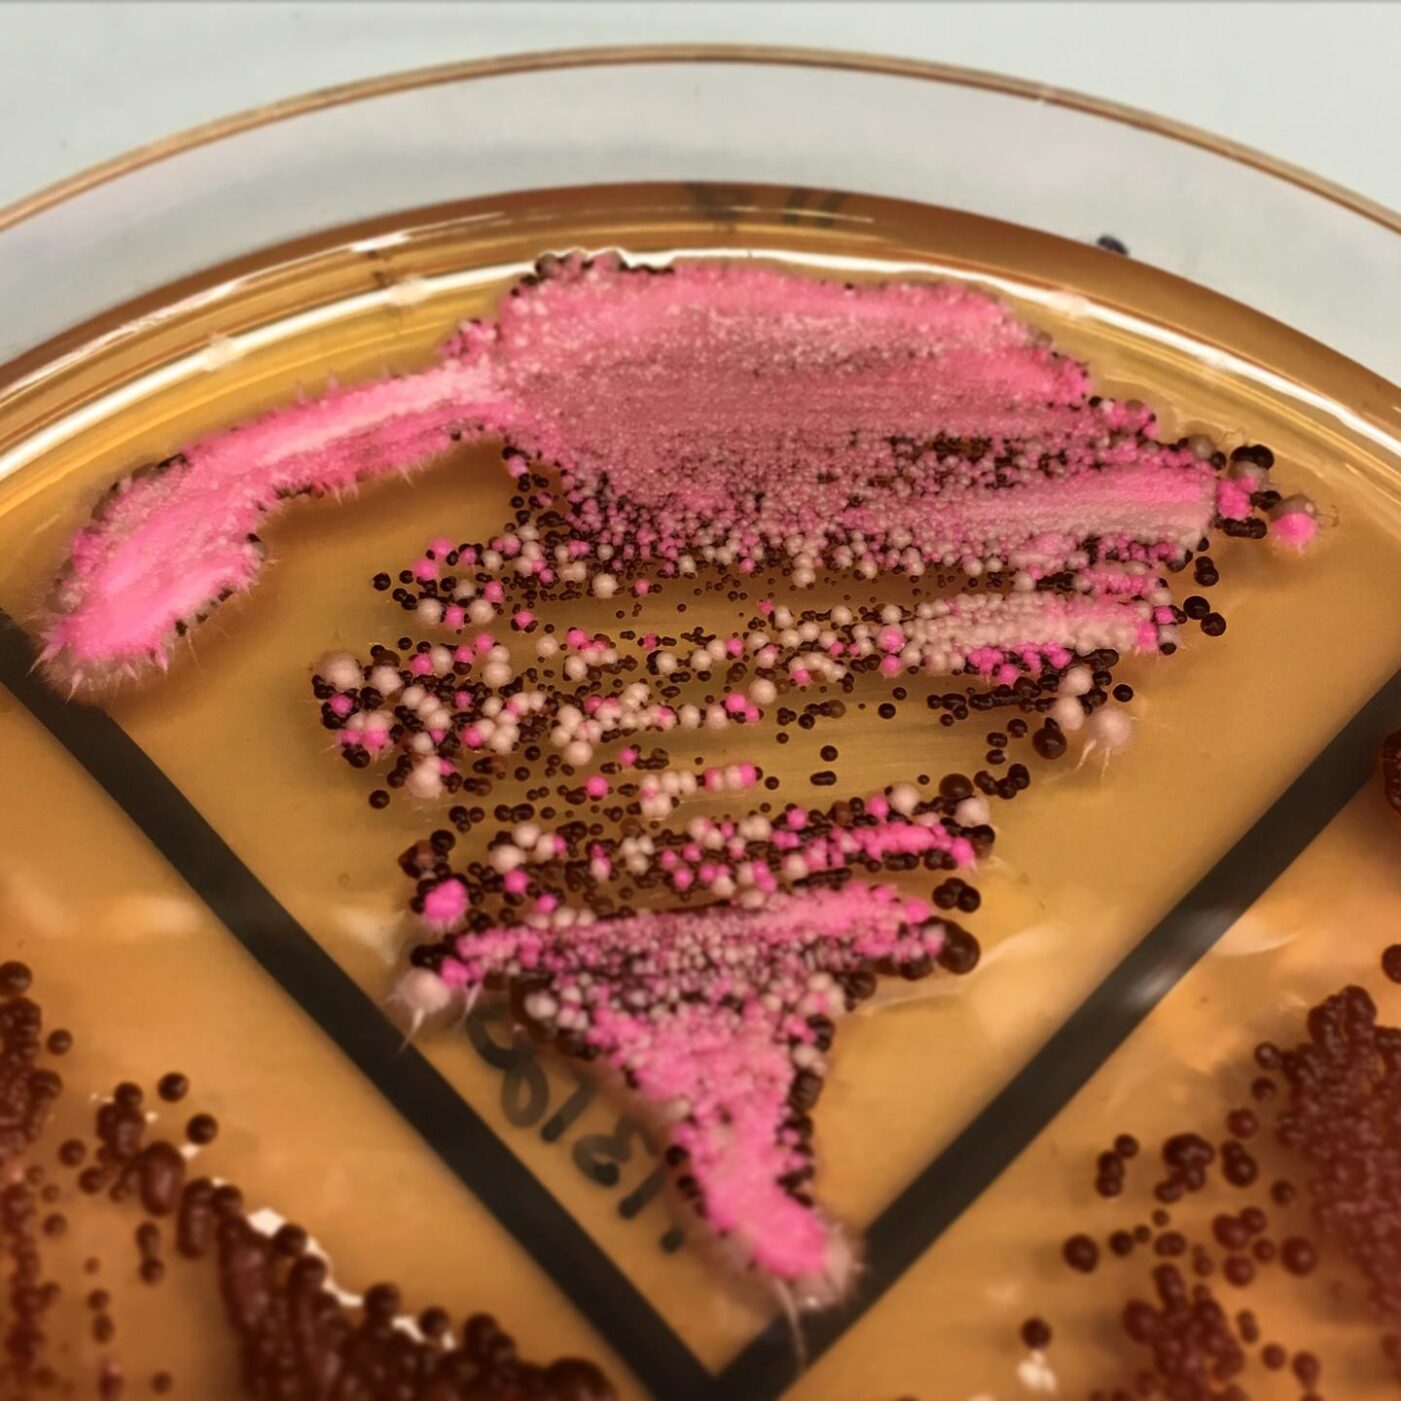 This image shows multicolored diploid <i>Candida albicans</i> fungi growing on an agar plate with red-colored colonies indicating that two copies of a marker gene have been effectively deleted by the gene drive. [Wyss Institute at Harvard University]” /><br />
<span class=